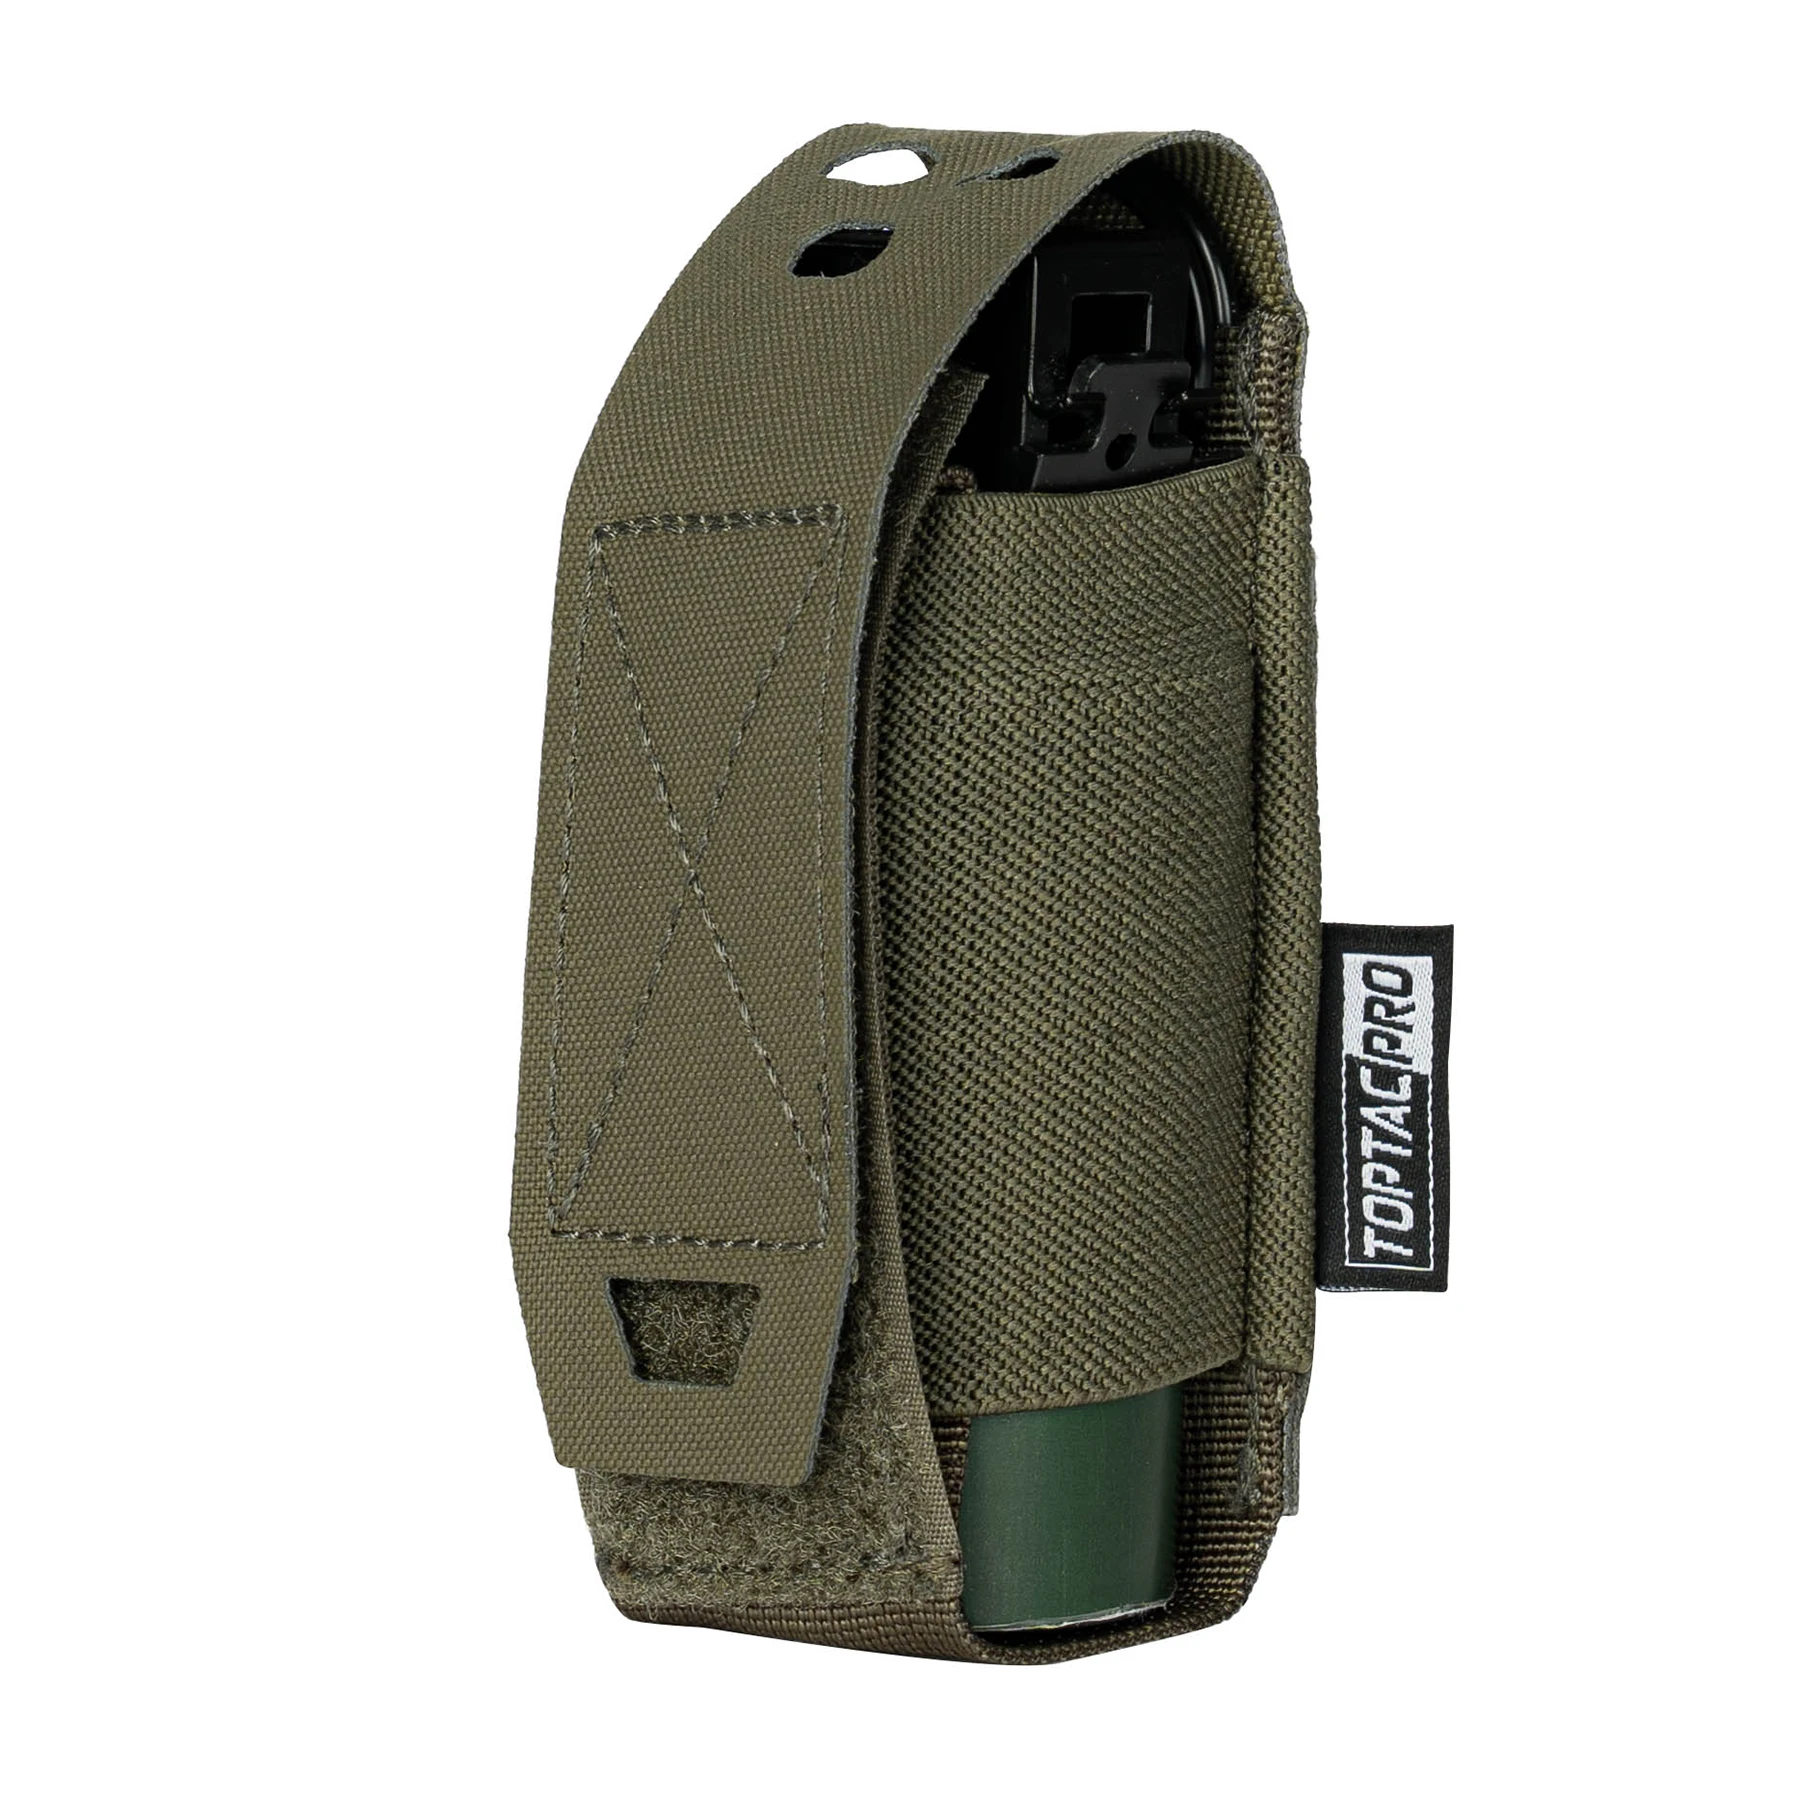 

TOPTACPRO 500D Cordura MOLLE Pouch Mag Pouch Flash Bang Pouch Tactical Flashlight Holder